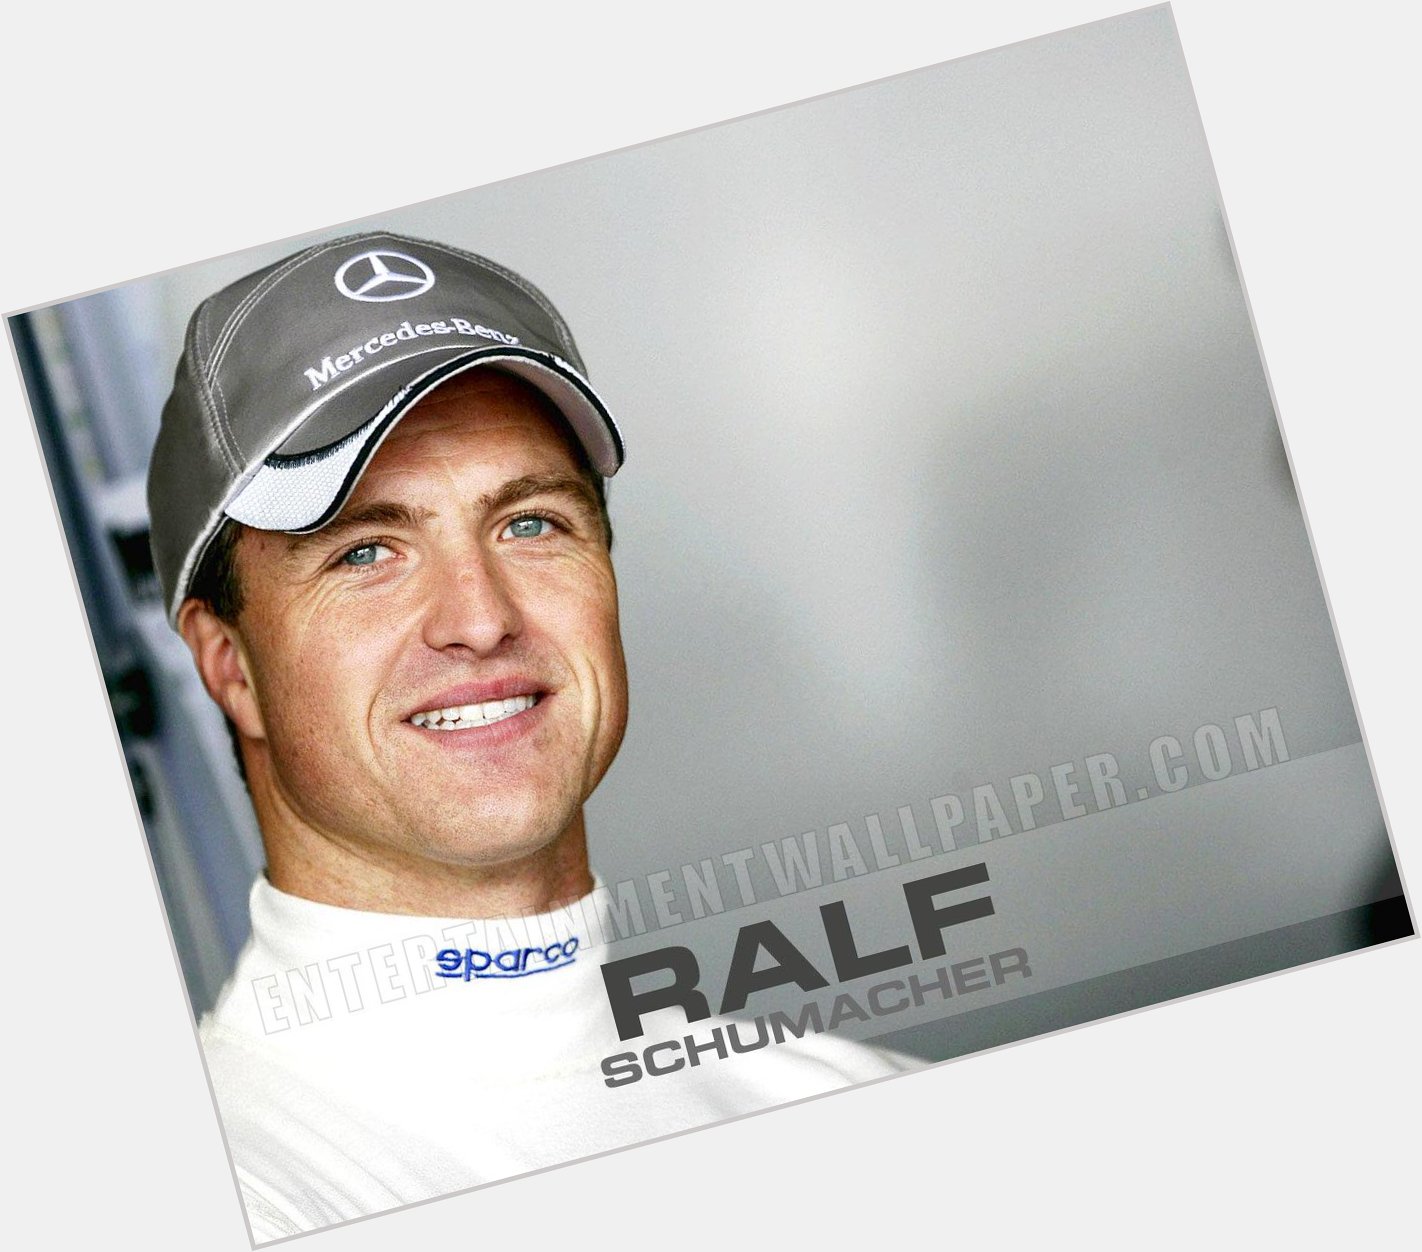 Happy birthday! Today Ralf Schumacher brother Michael is 40 years old congratulations! 